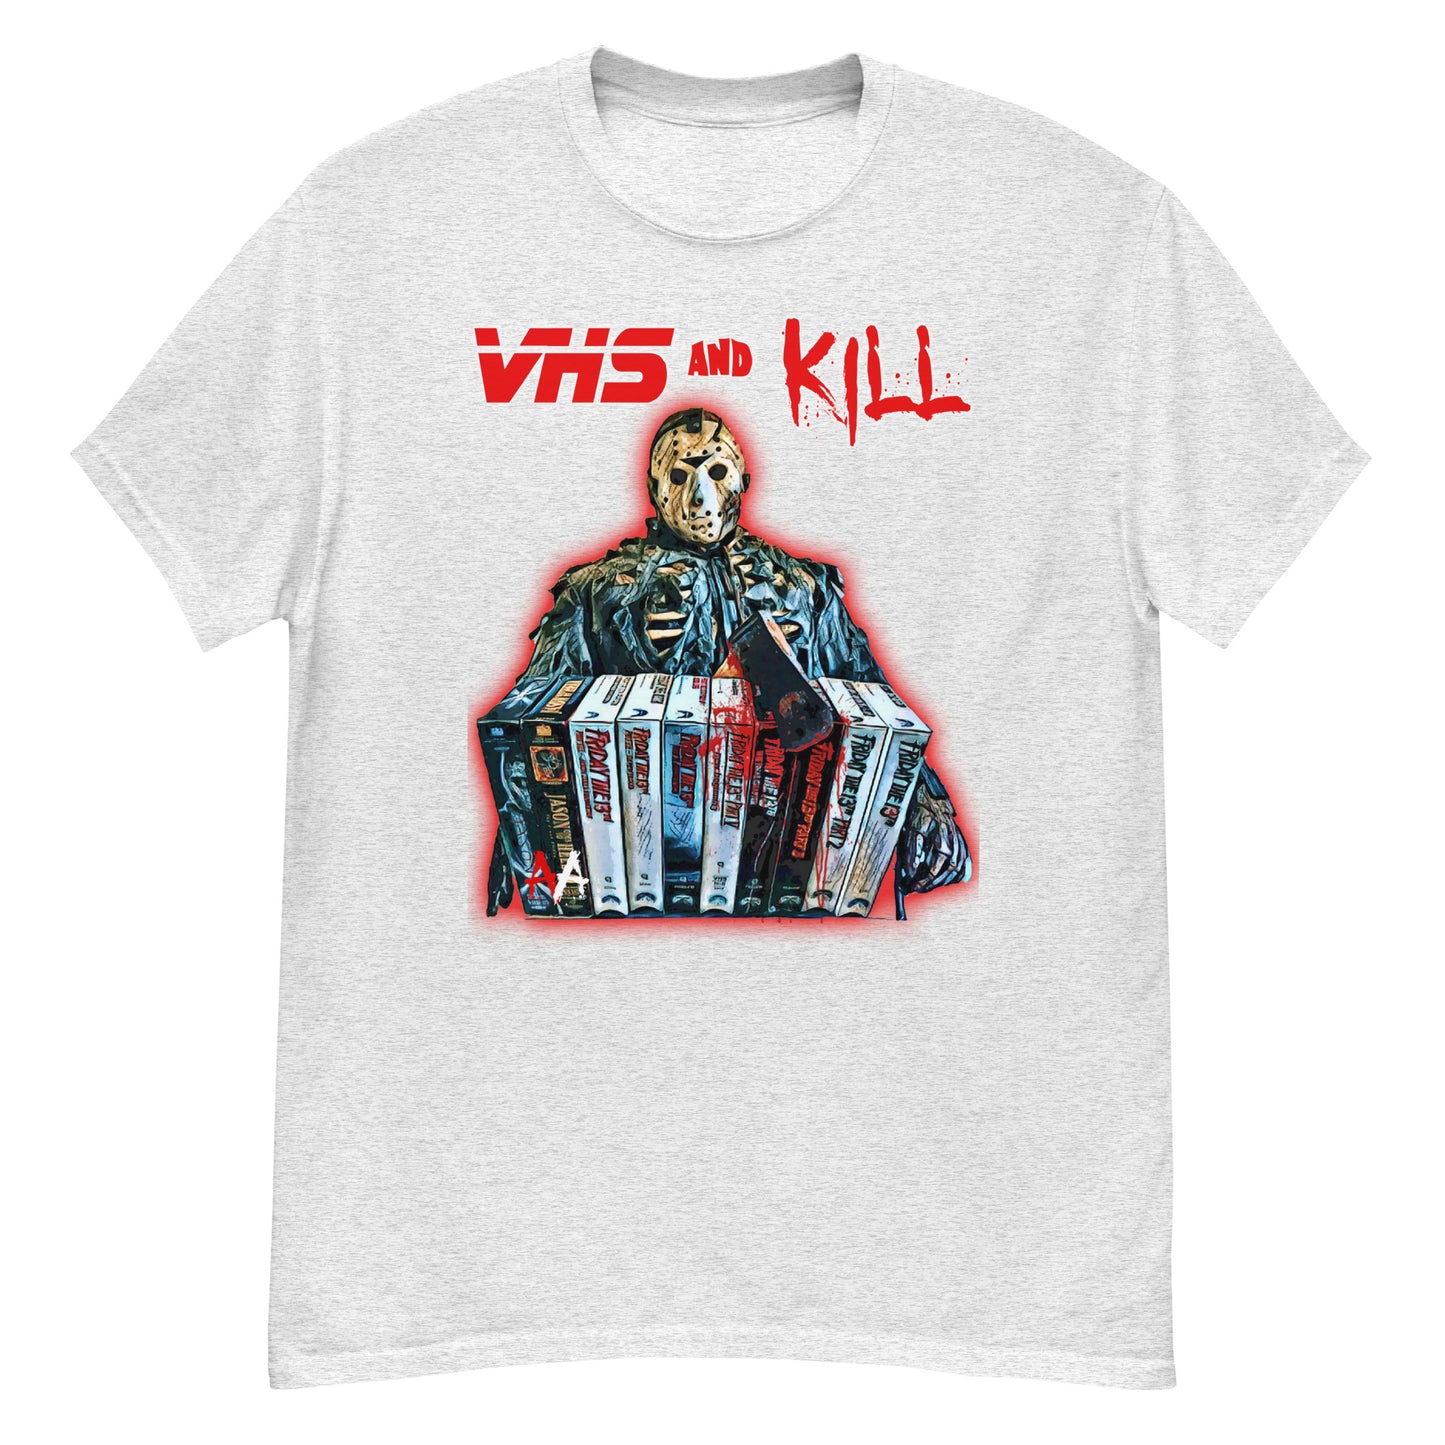 VHS and Kill: Jason Voorhees Friday The 13th Tee - thenightmareinc